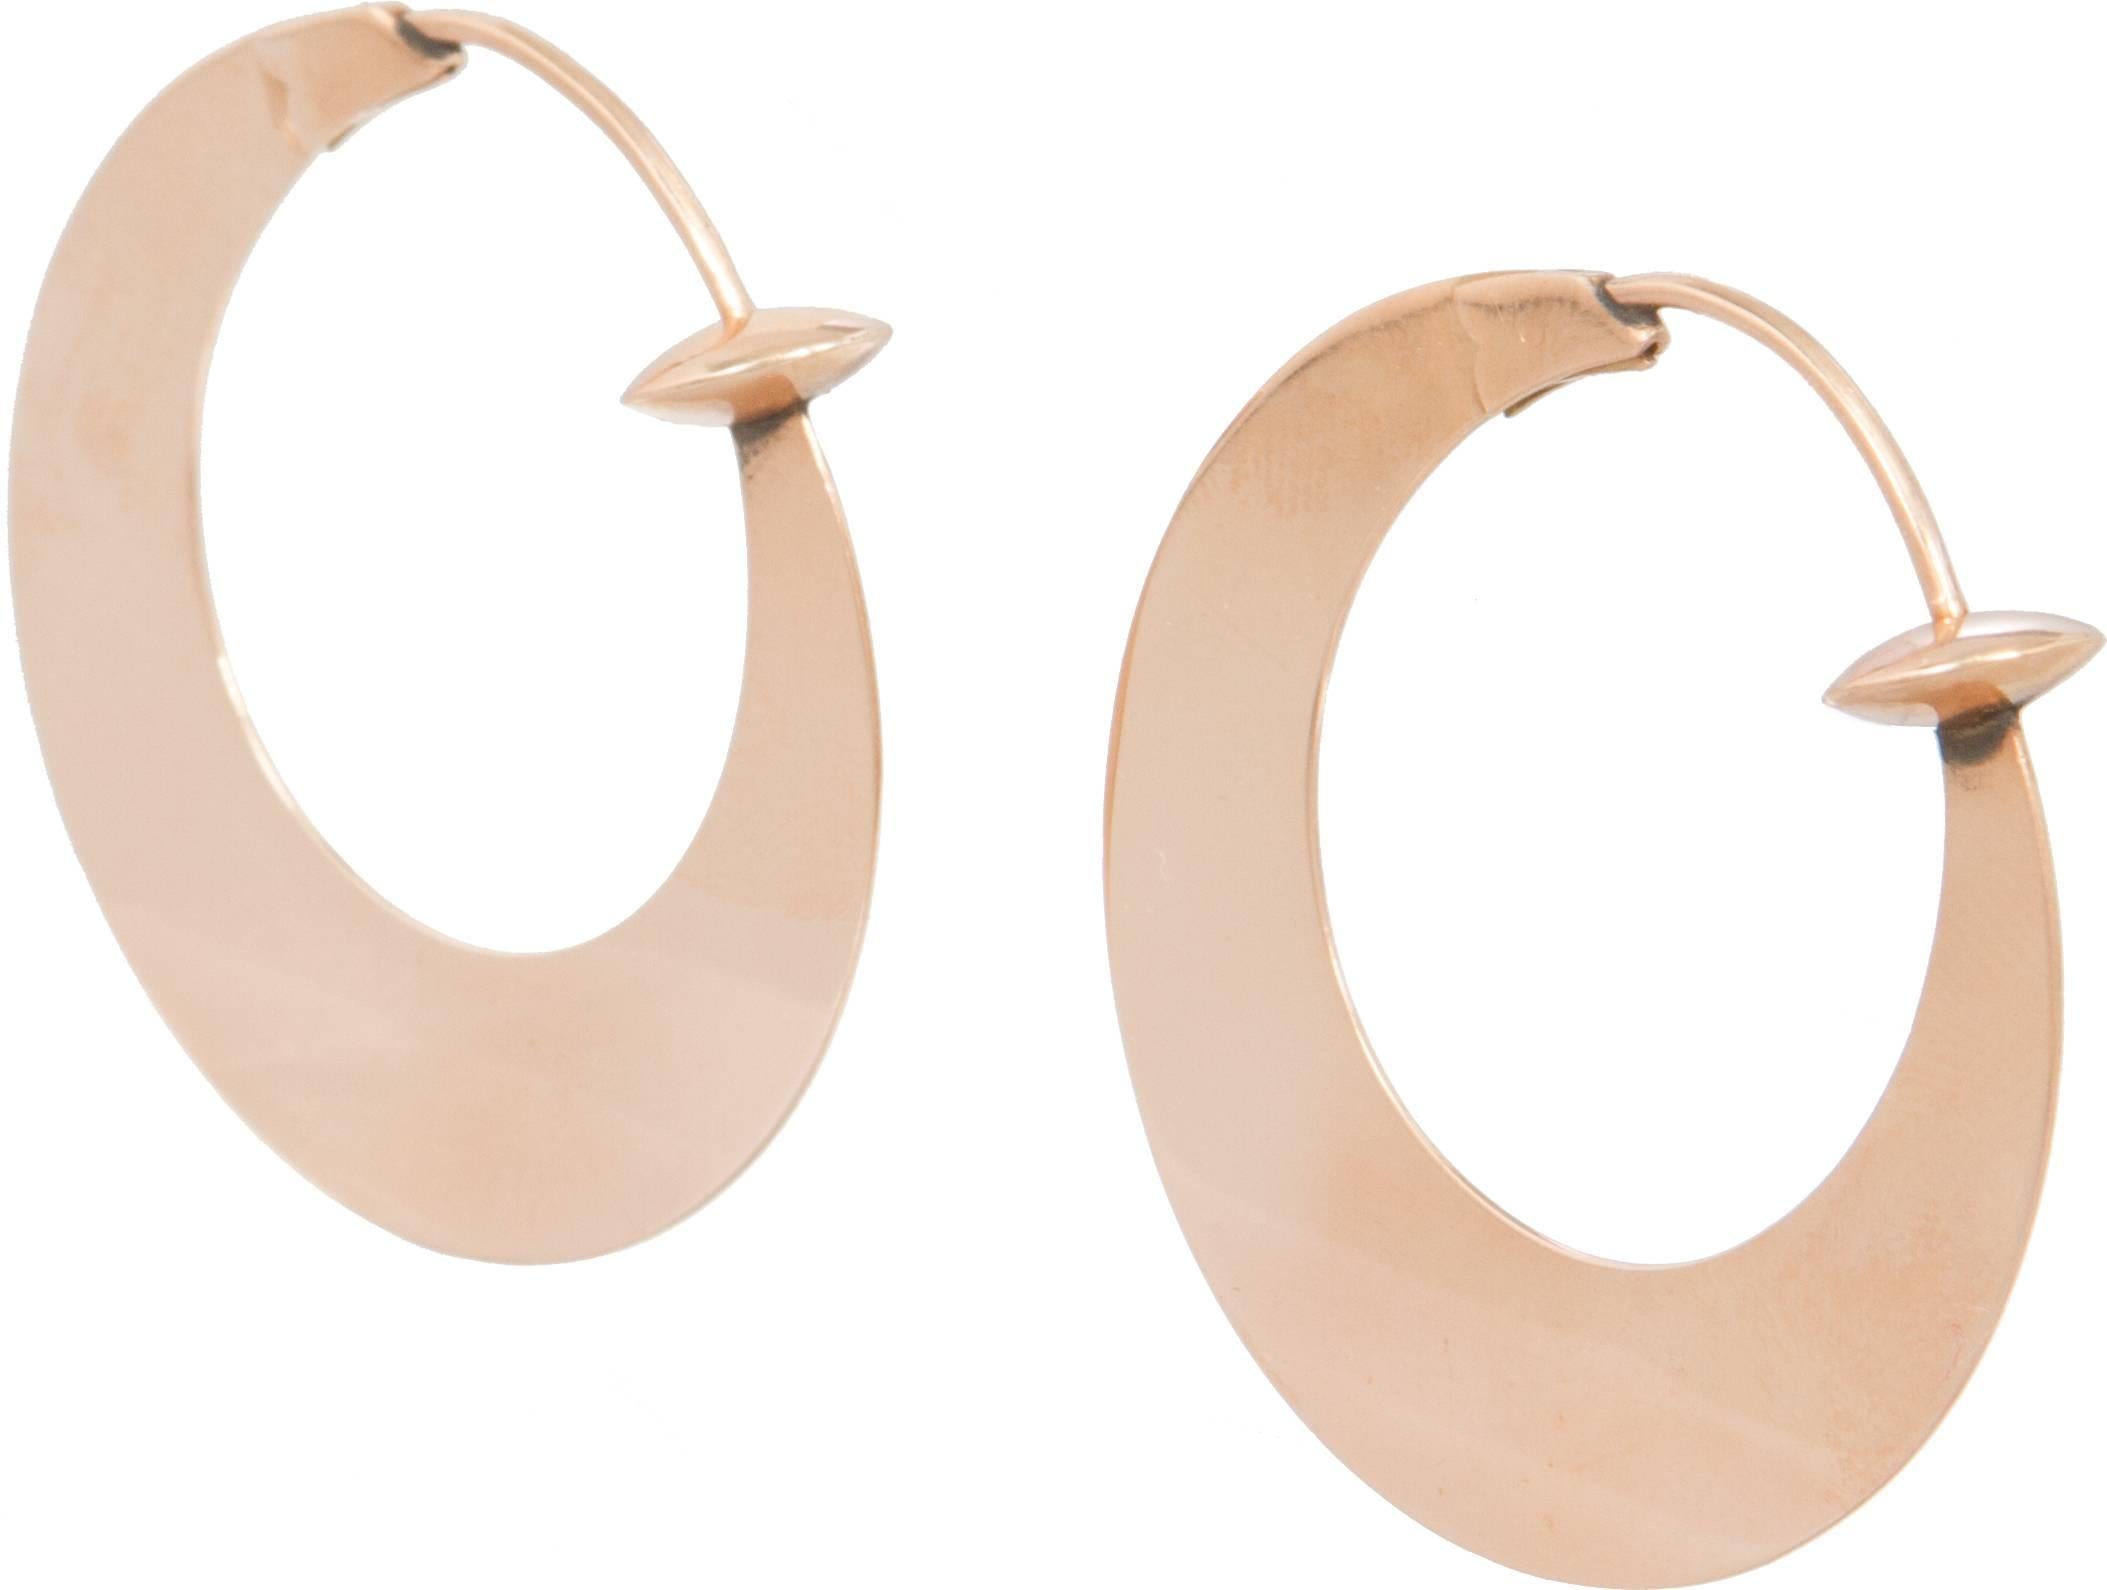 These 14kt vintage earrings are easy to wear and look great on, having a modern look.